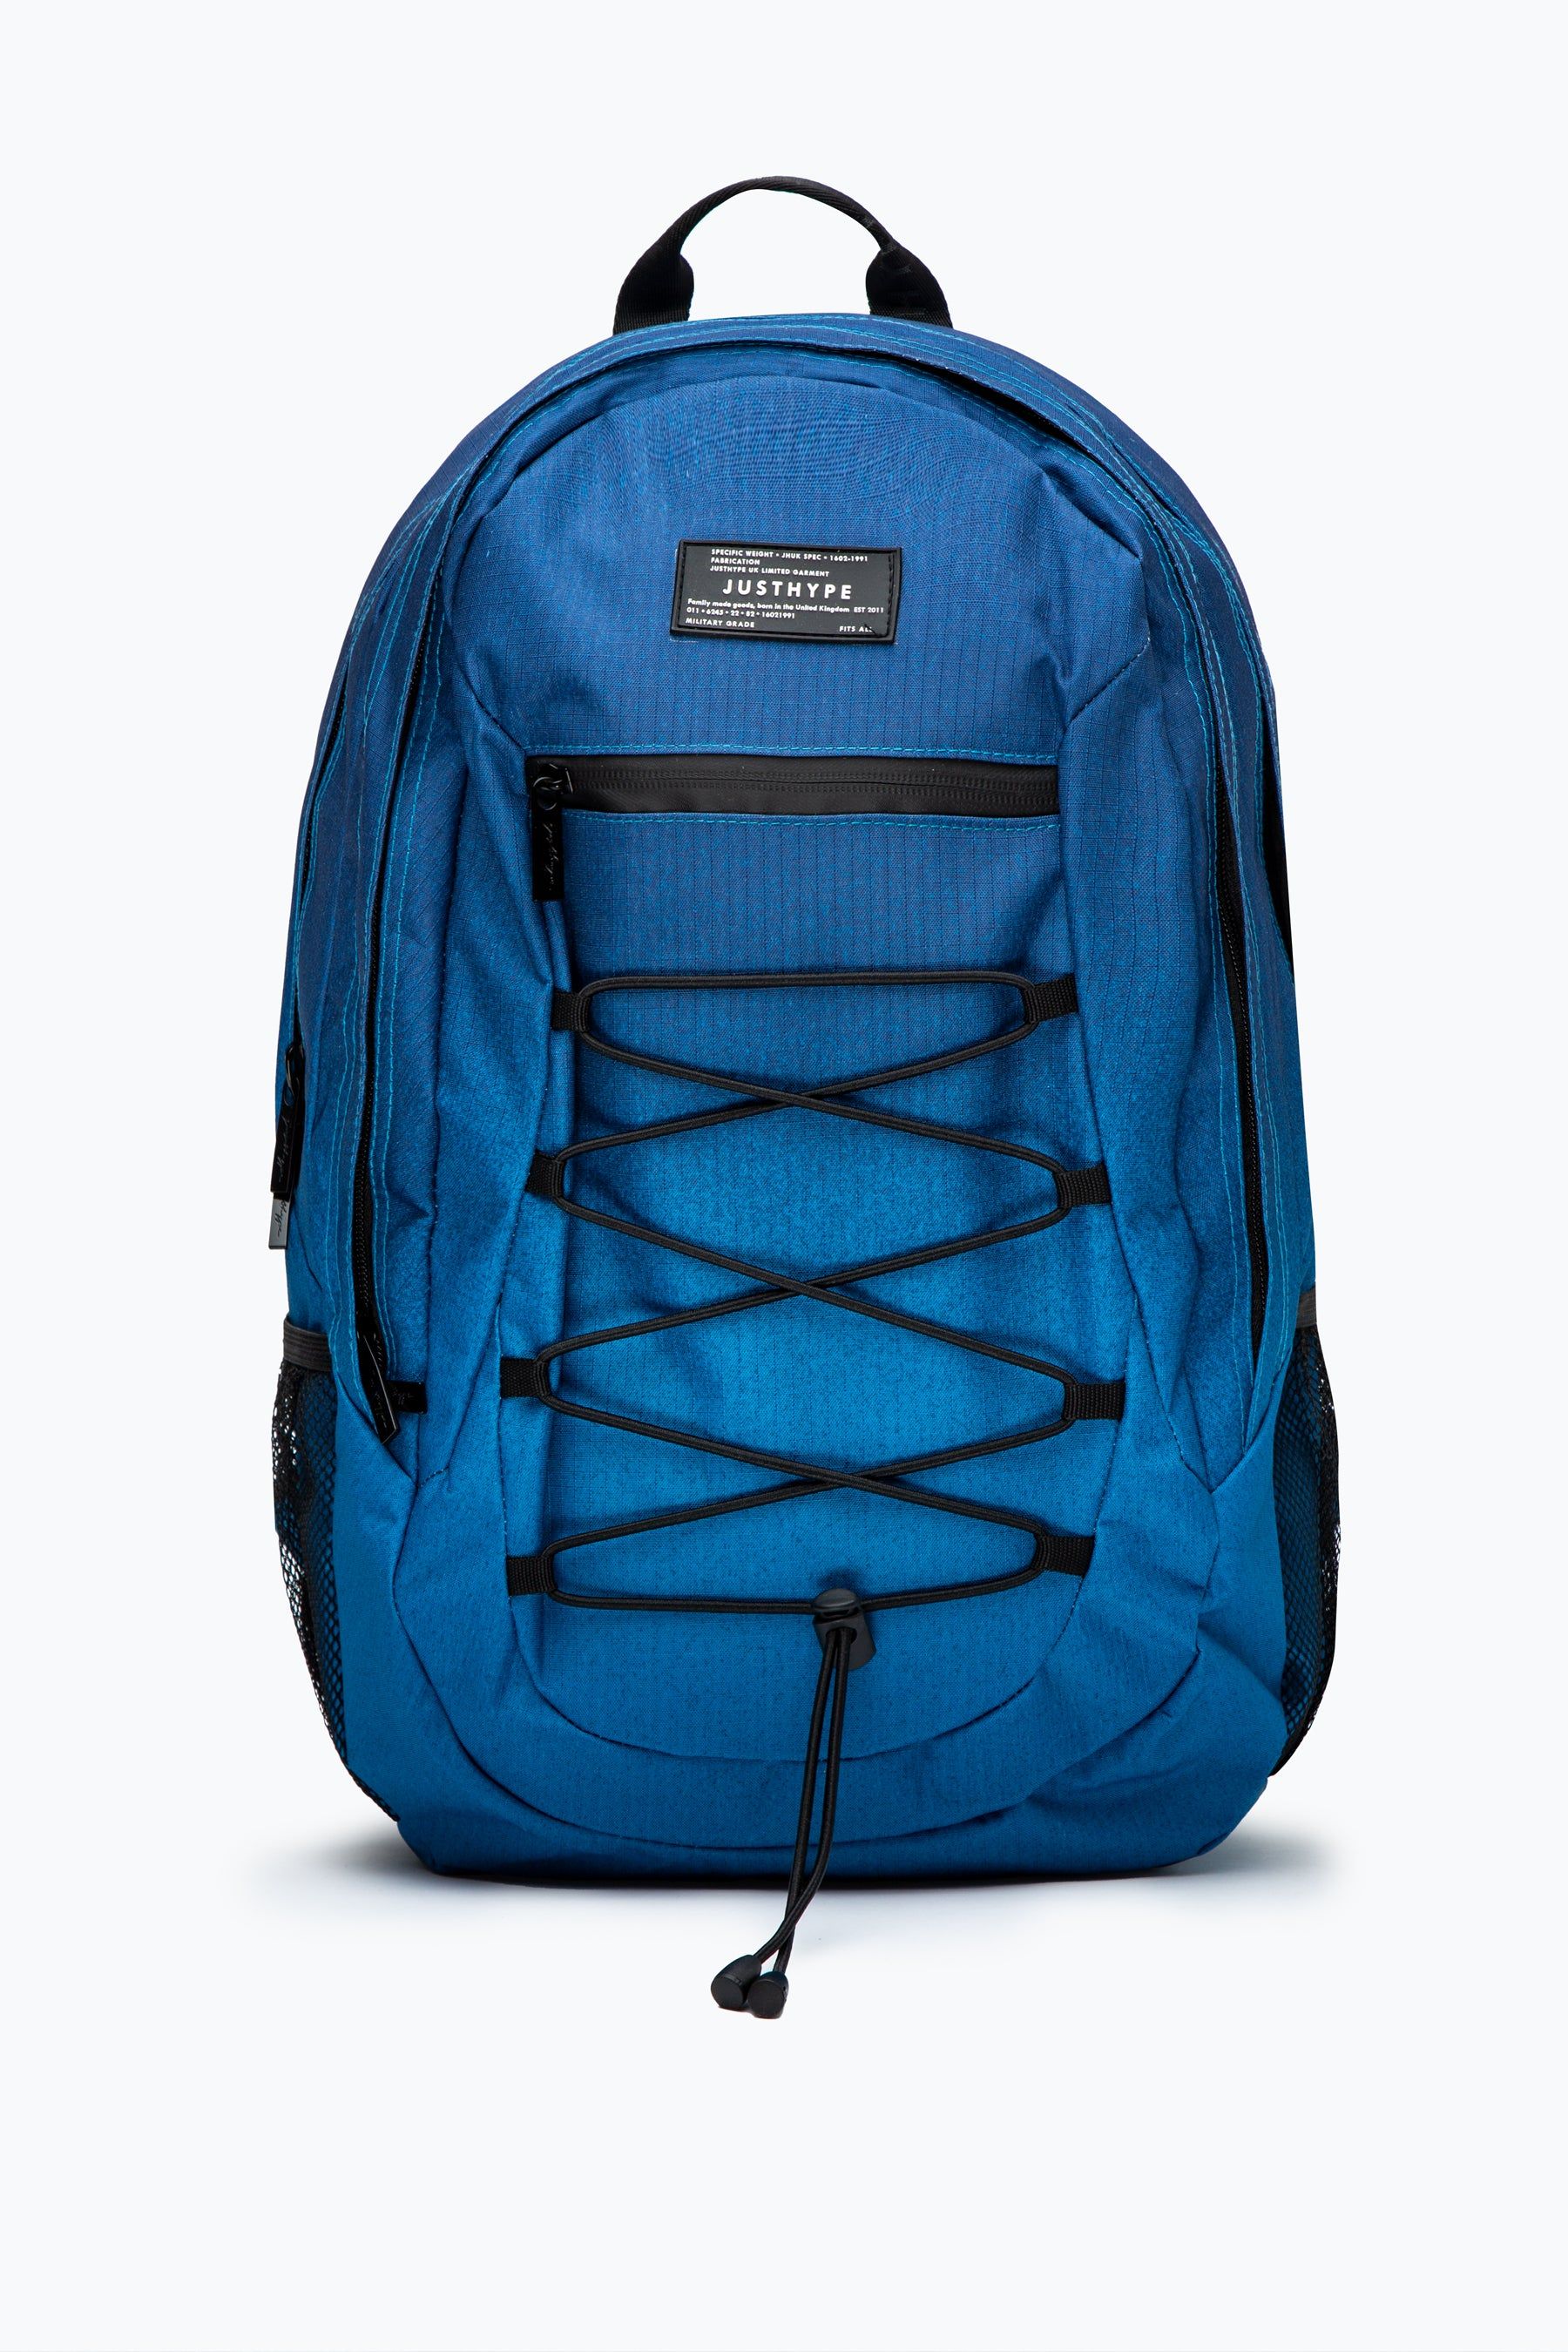 The HYPE. Blue Speckle Fade Military Patch Maxi Backpack is the perfect transporter for all your back to school, work, or gym essentials. Designed with embossed inside lining and compartments to keep your essentials in their own compartments. This is a backpack from our maxi range, with extra storage space to transport the extra goods you need. Boasting the HYPE. logo on a raised rubber badge, branded zips and straps are designed to offer supreme comfort. Please ensure you wipe clean only.